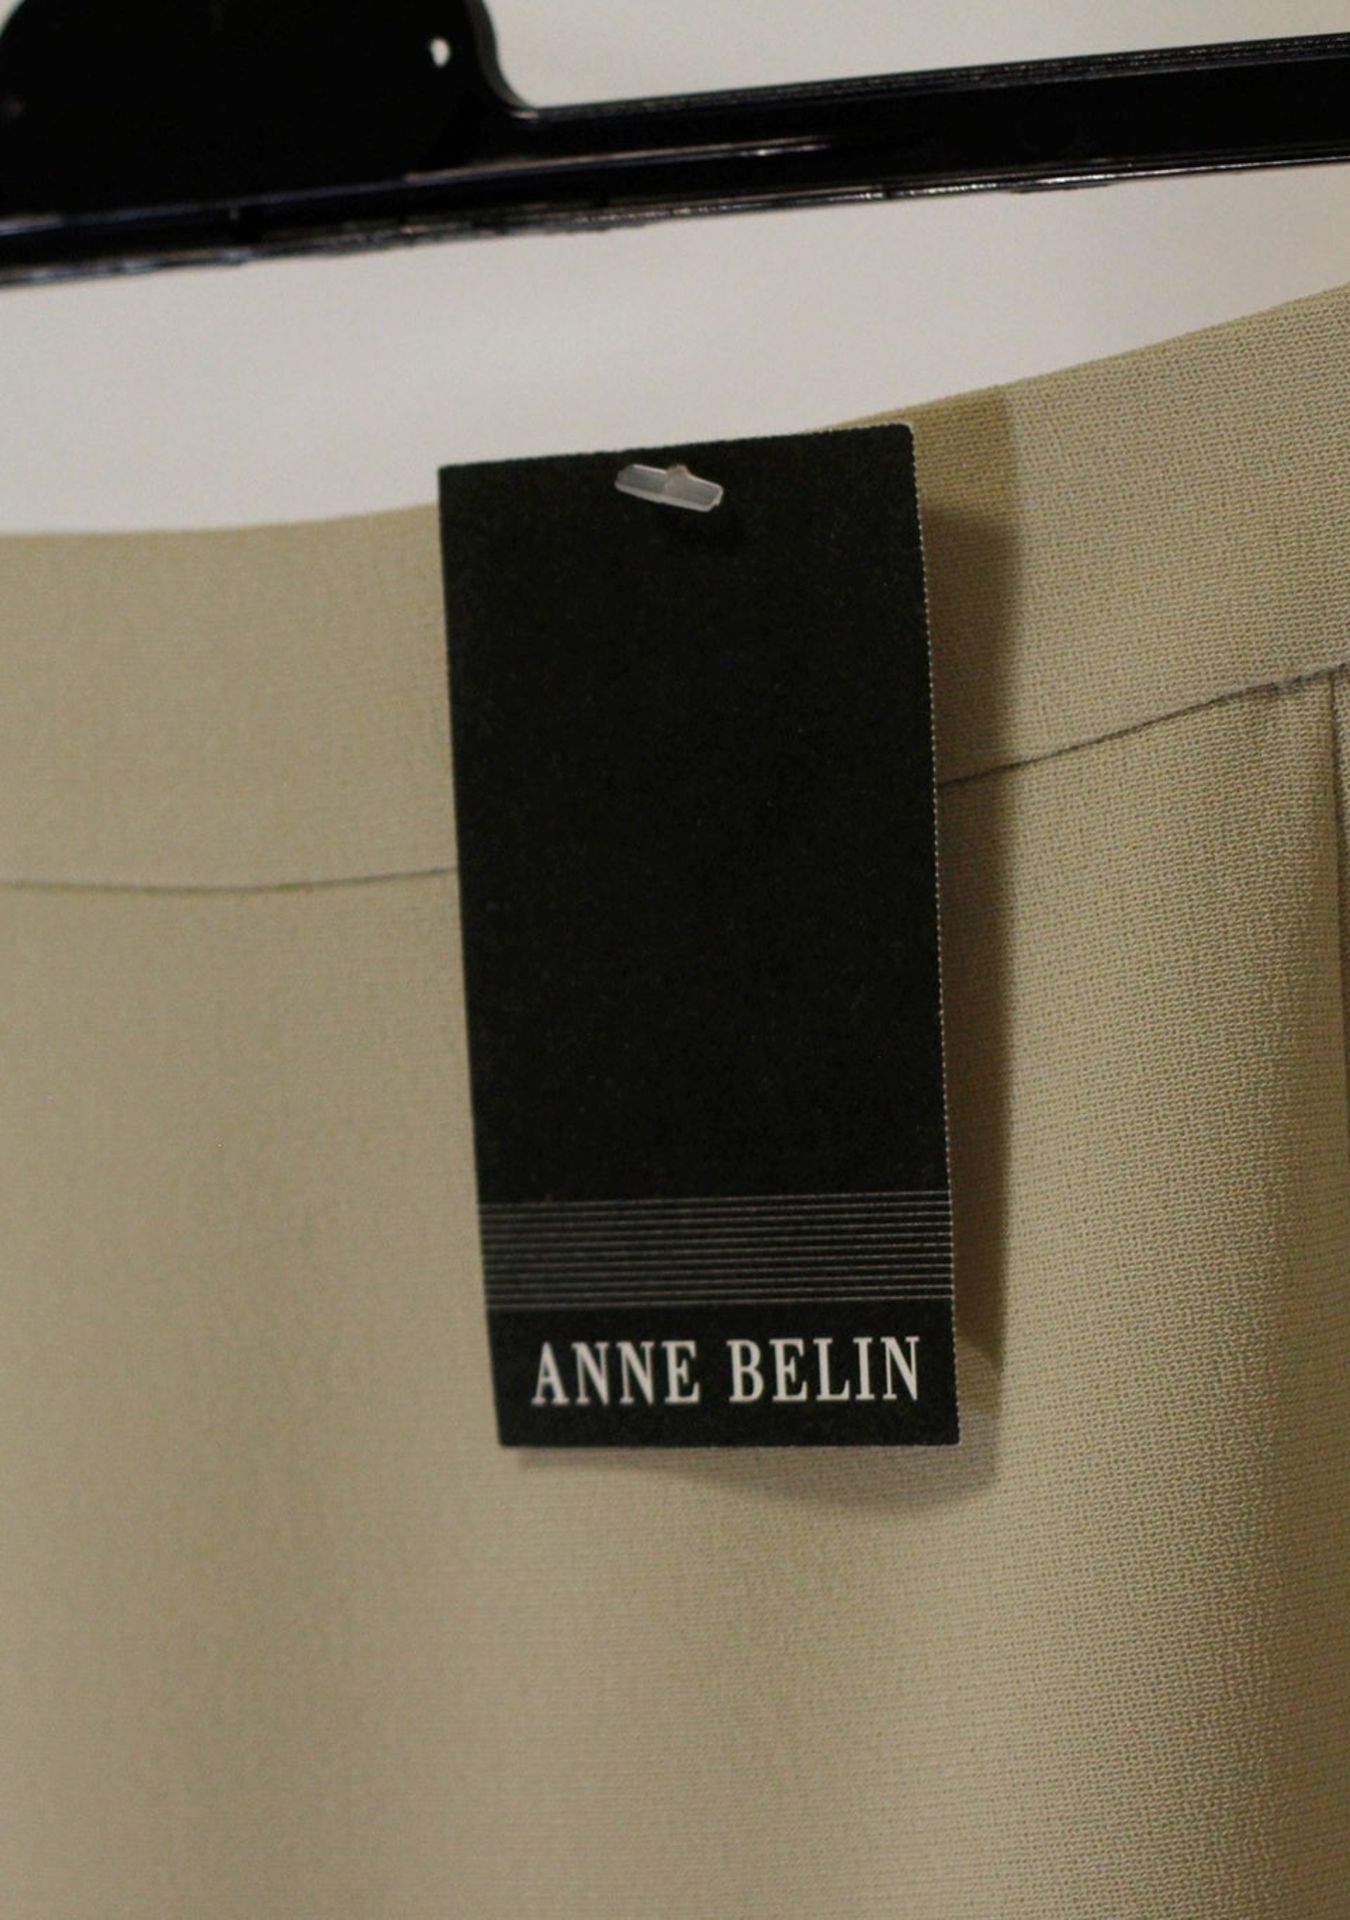 1 x Anne Belin Pistachio Skirt - Size: 20 - Material: 100% Polyester - From a High End Clothing - Image 4 of 12